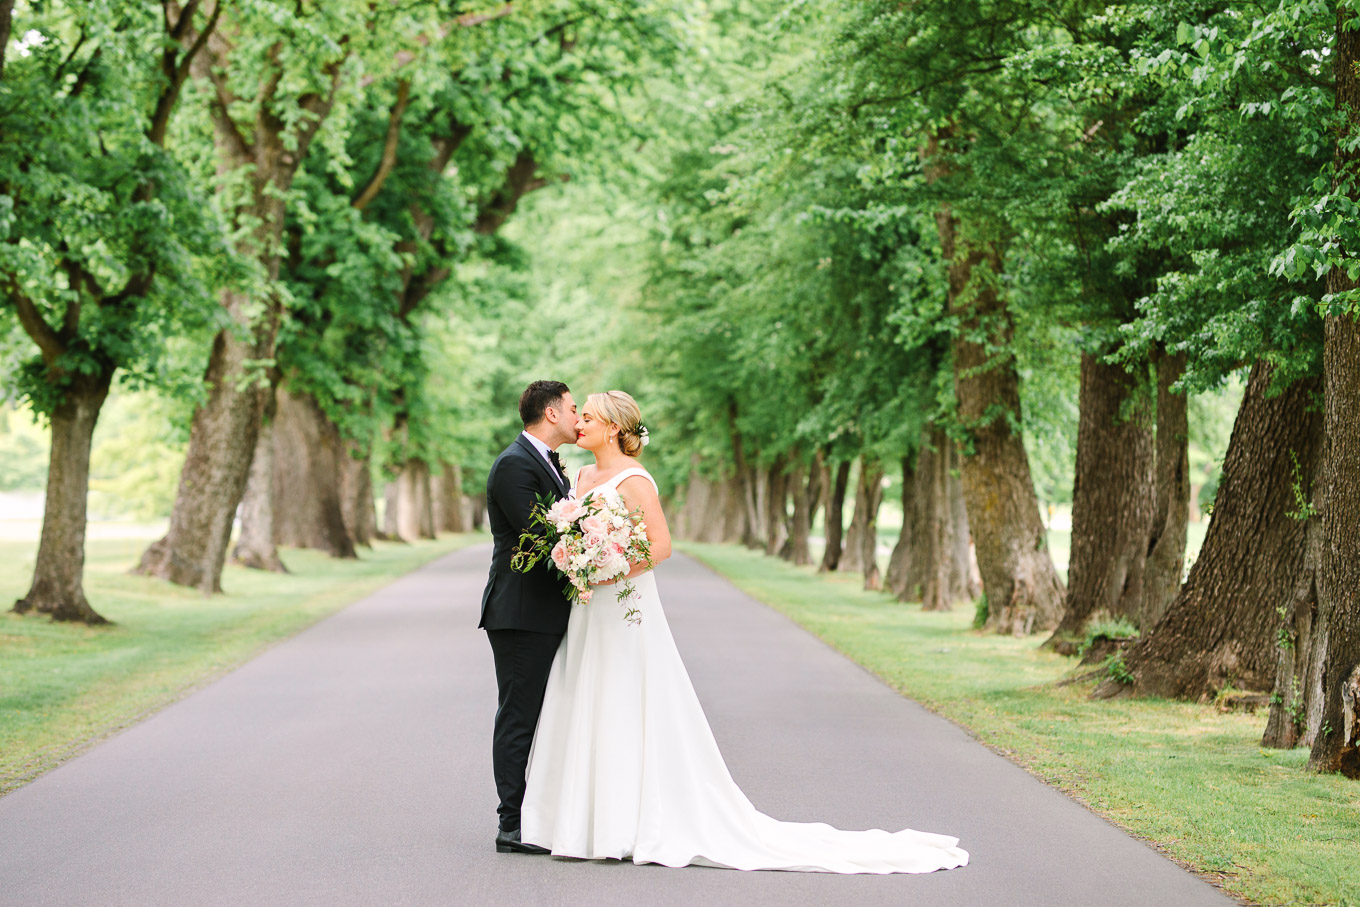 Bride and groom kissing on tree-lined road. Millbrook Resort Queenstown New Zealand wedding by Mary Costa Photography | www.marycostaweddings.com